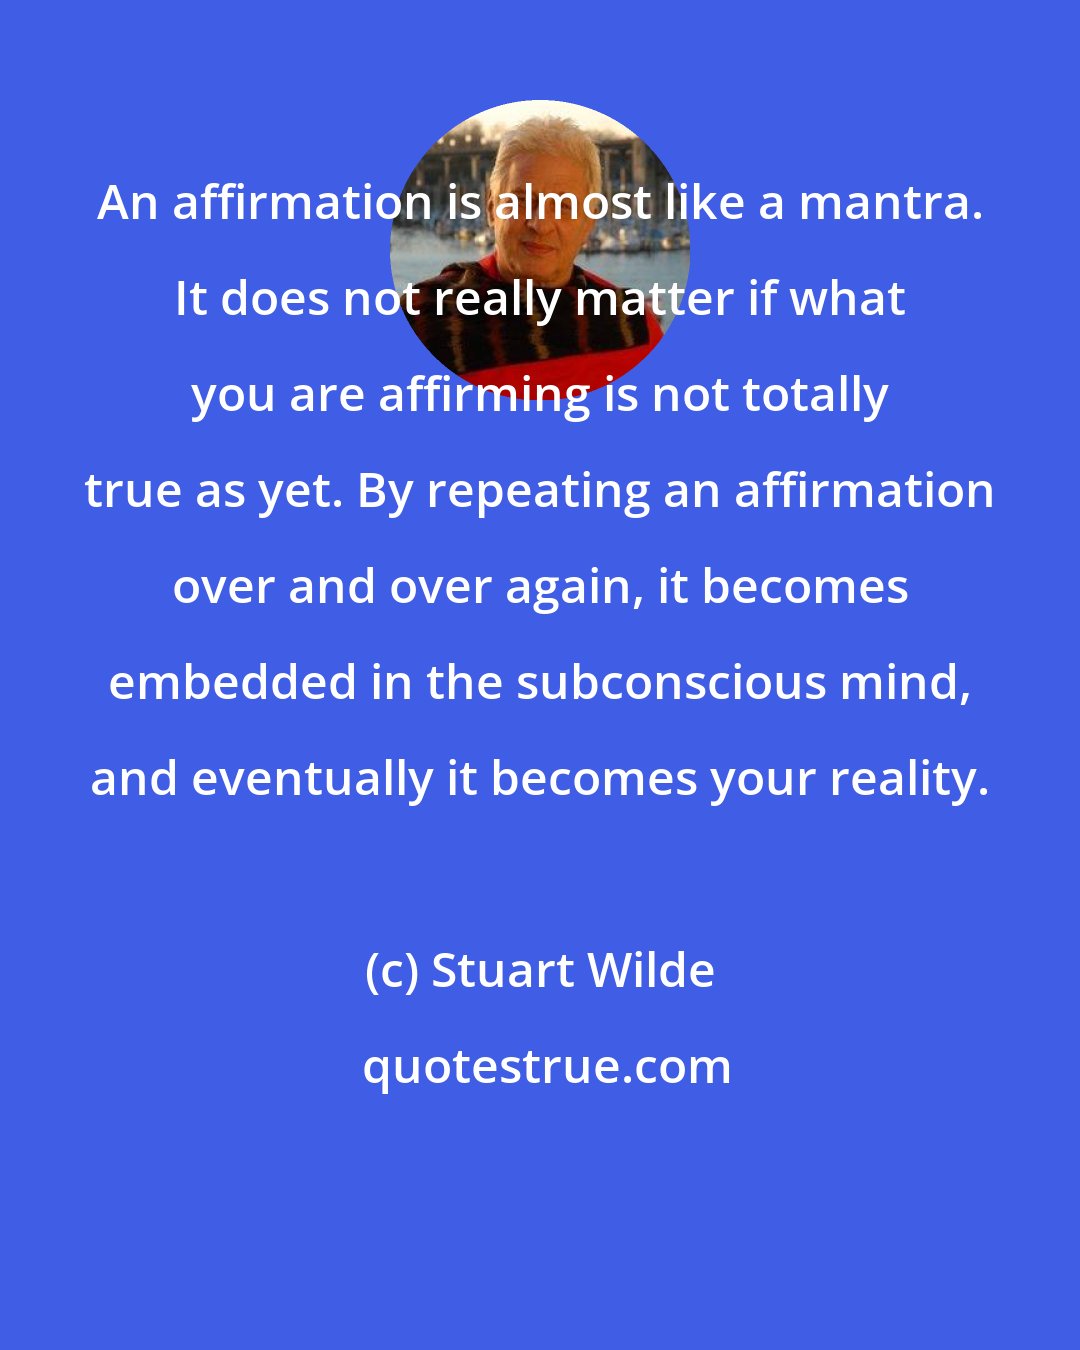 Stuart Wilde: An affirmation is almost like a mantra. It does not really matter if what you are affirming is not totally true as yet. By repeating an affirmation over and over again, it becomes embedded in the subconscious mind, and eventually it becomes your reality.